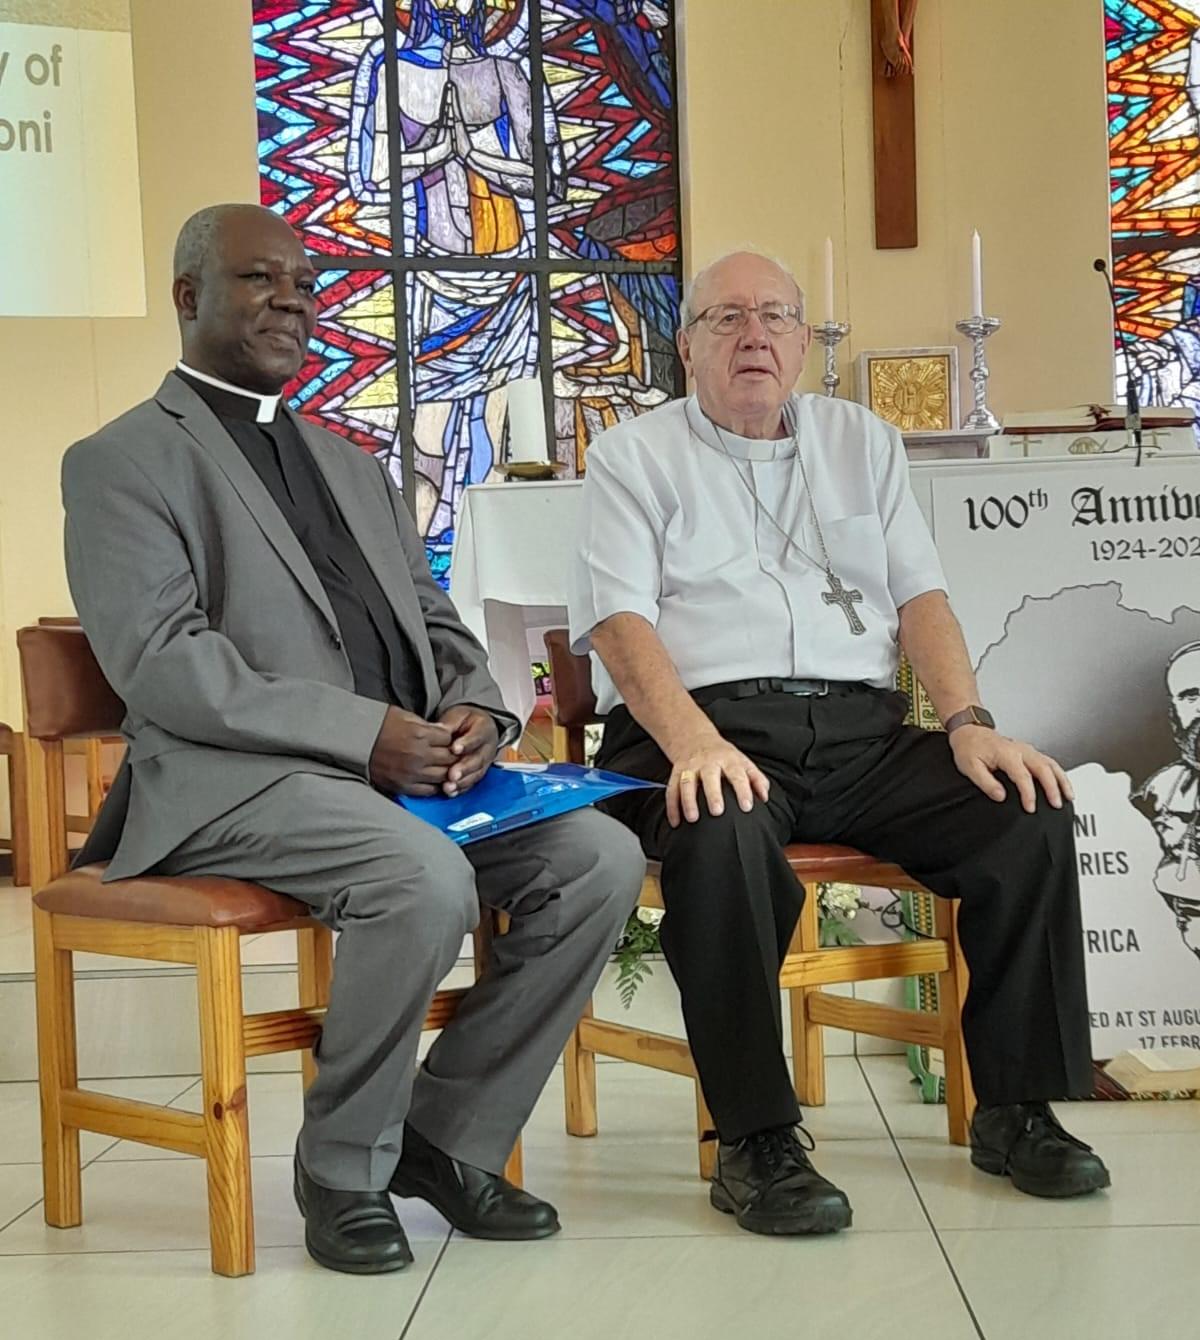 South Africa: The Comboni Jubilee in the Archdiocese of Pretoria at our Parish in Silverton